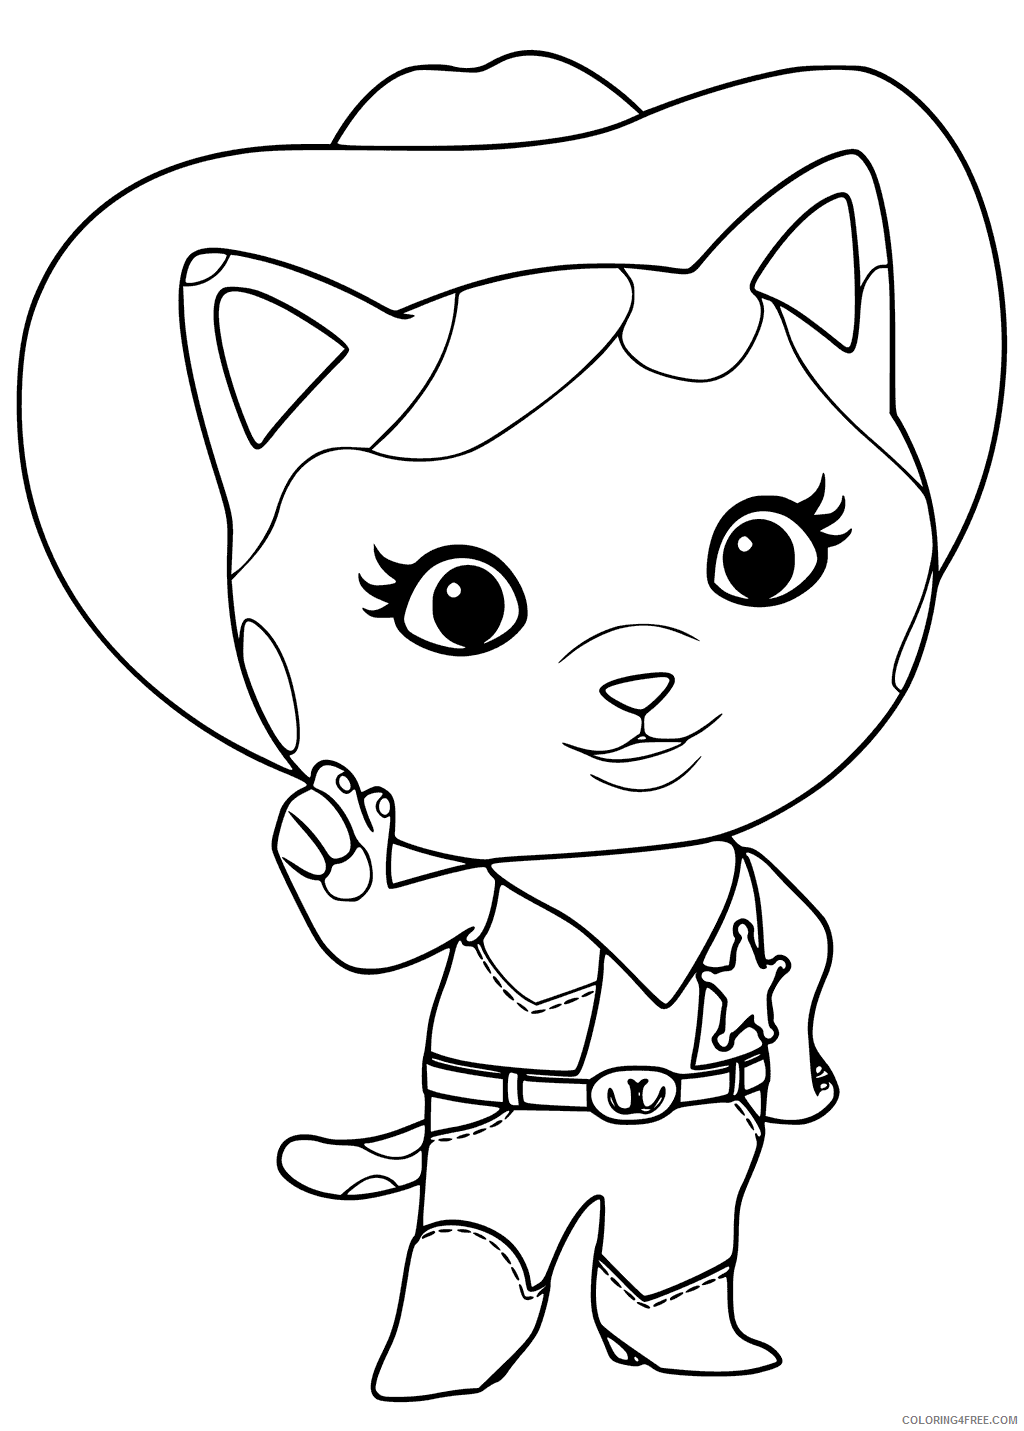 Sheriff Callie Coloring Pages TV Film Sheriff Callie Printable 2020 07517 Coloring4free